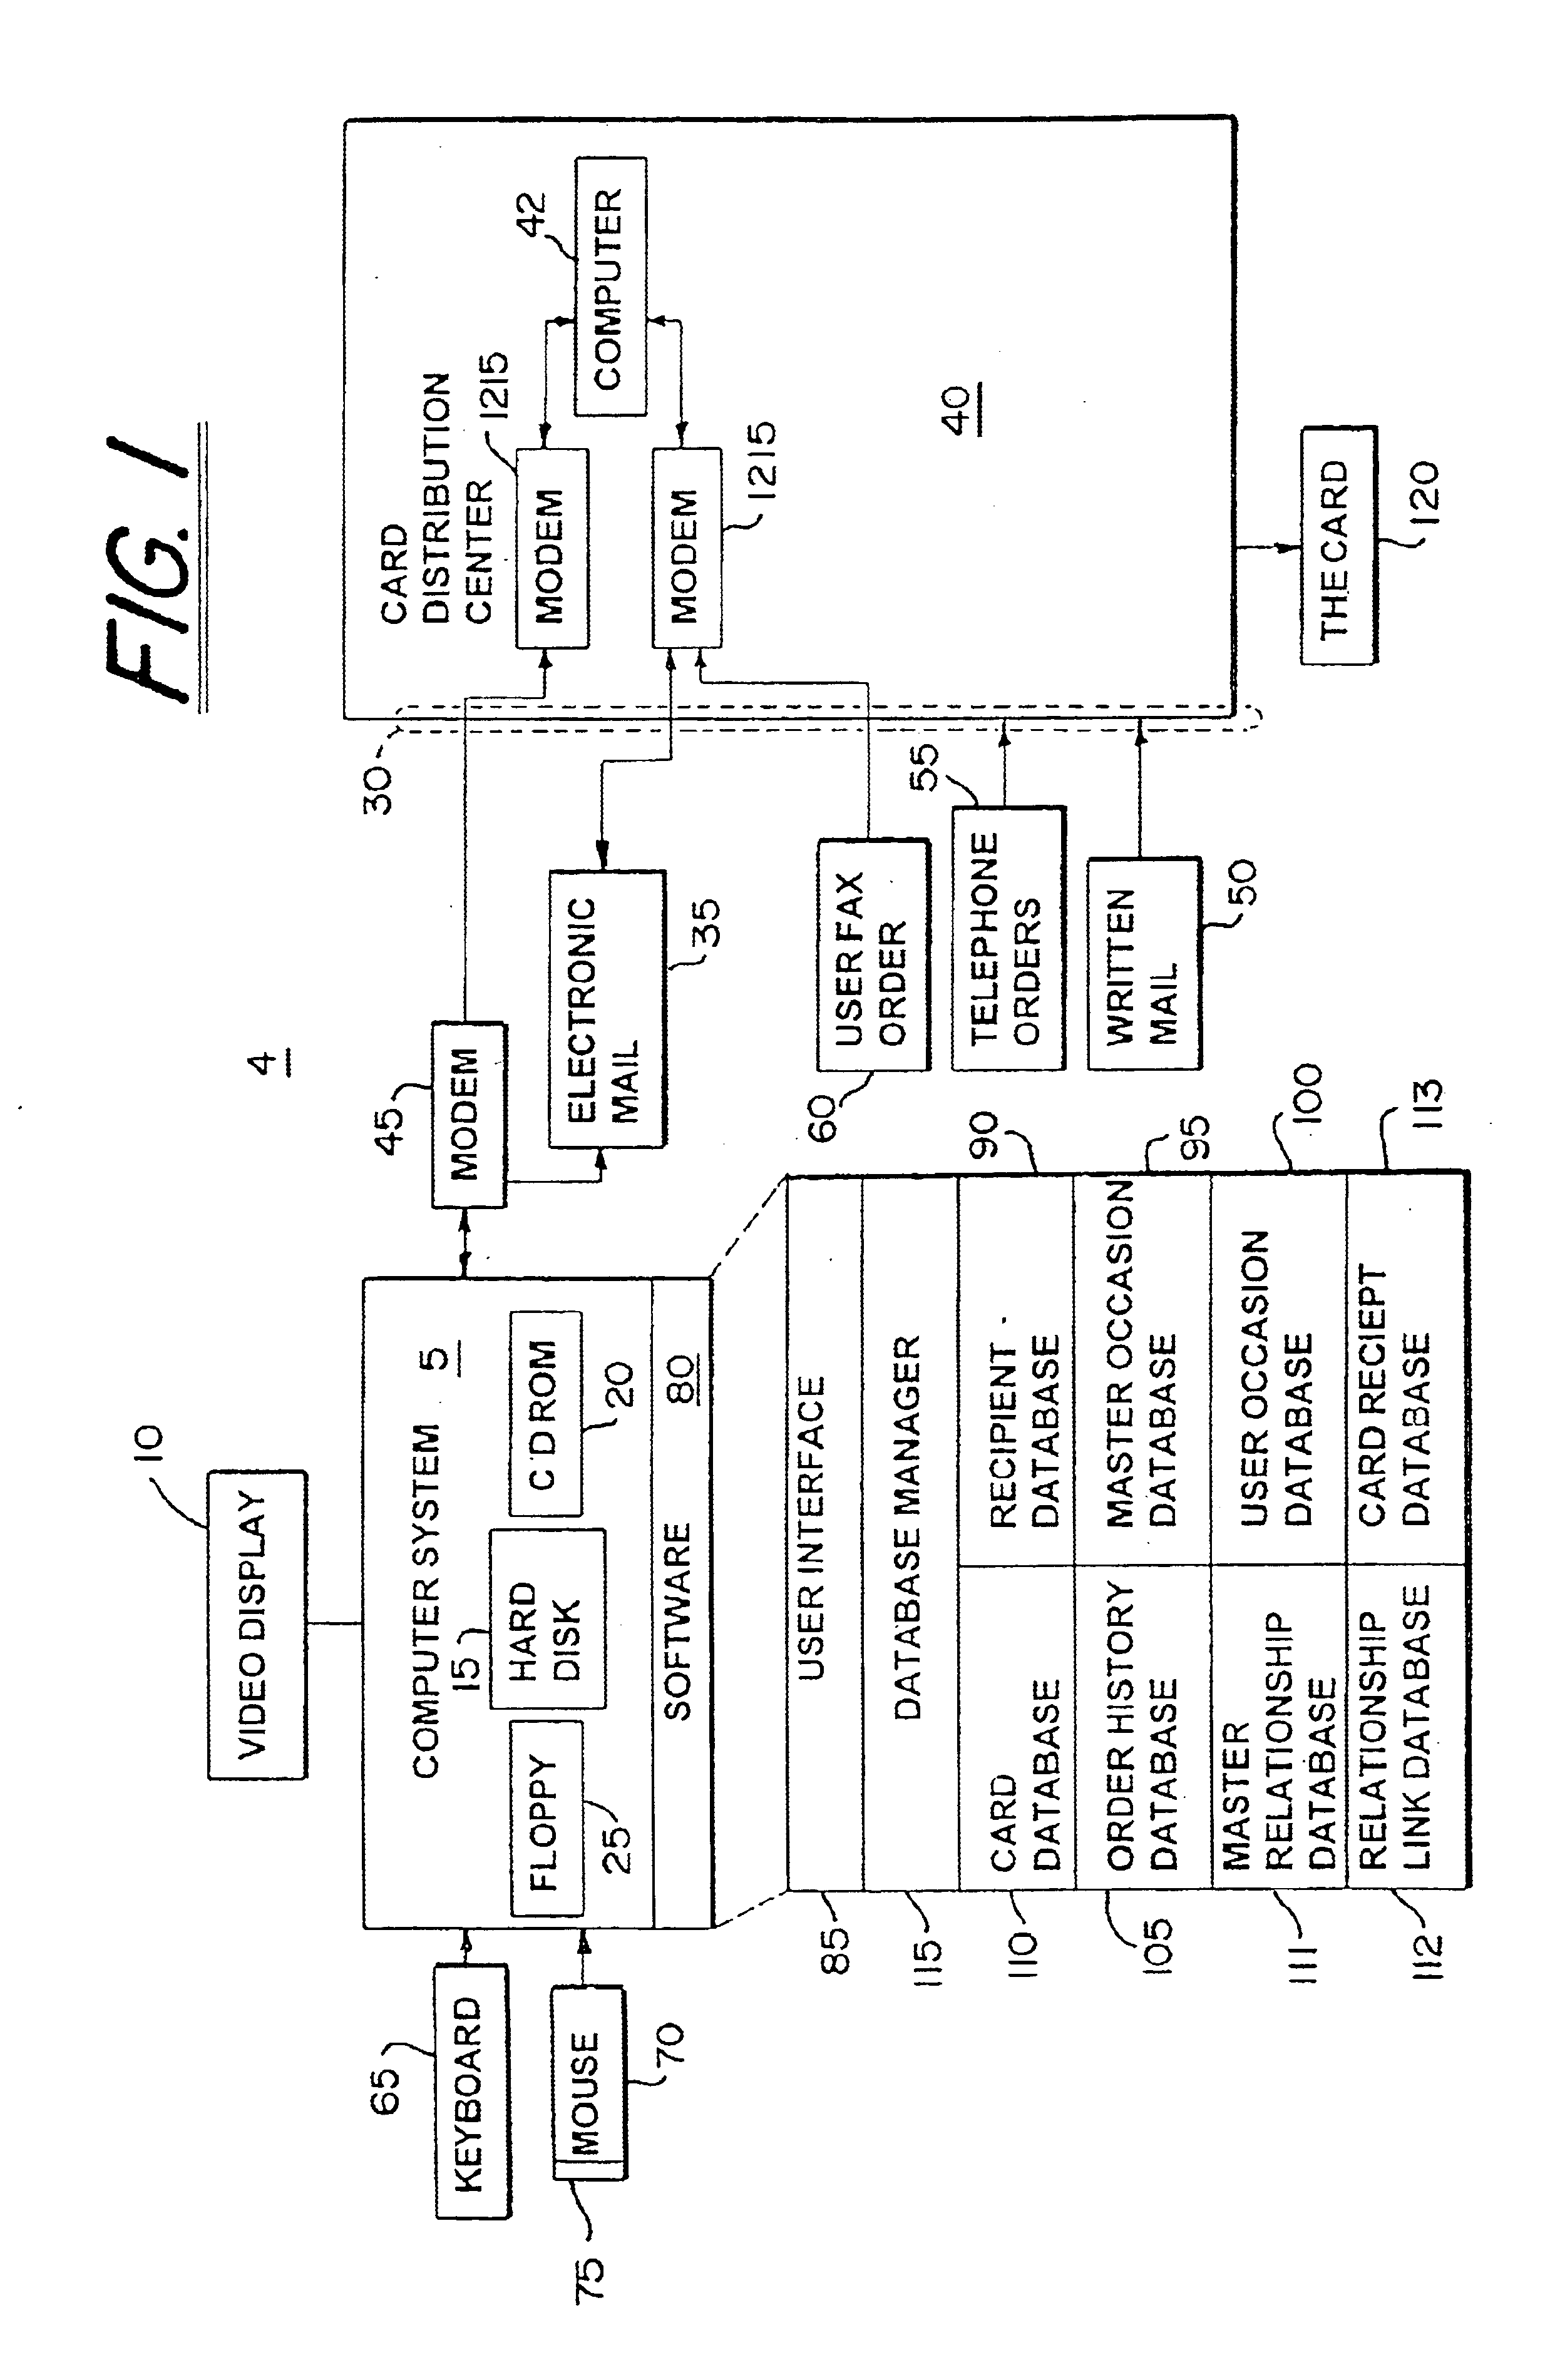 Method and apparatus for communicating with a card distribution center for selecting, ordering, and sending social expression cards